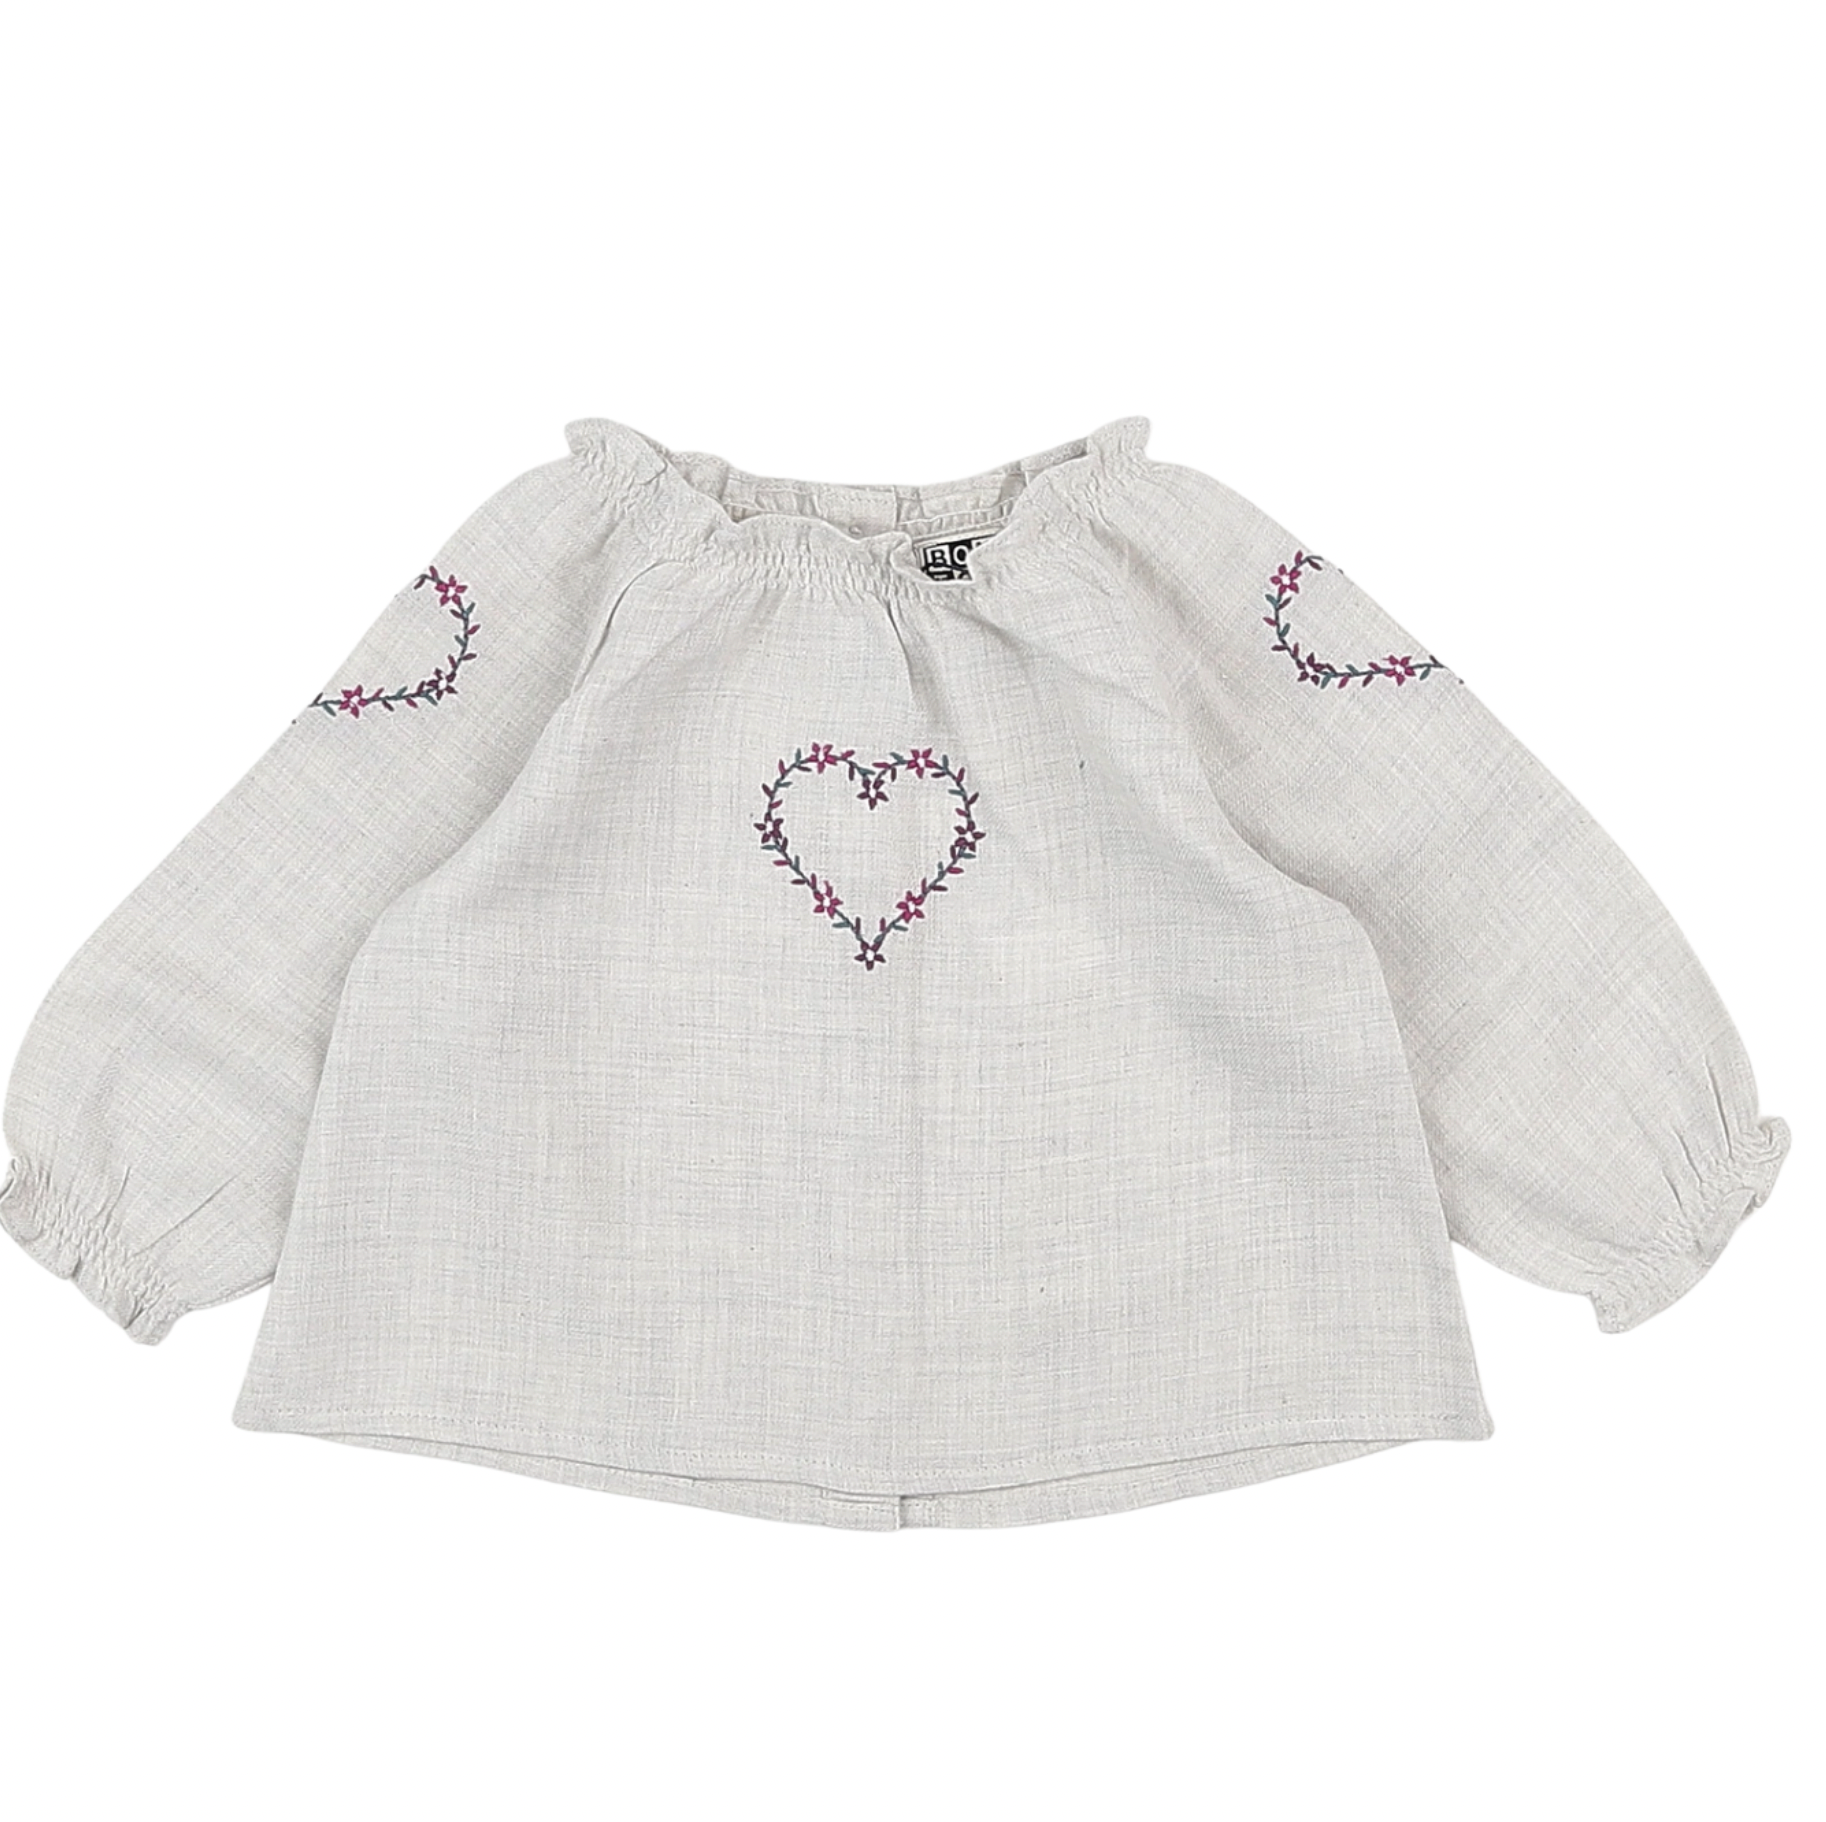 BONTON - Blouse with hearts - 6 months